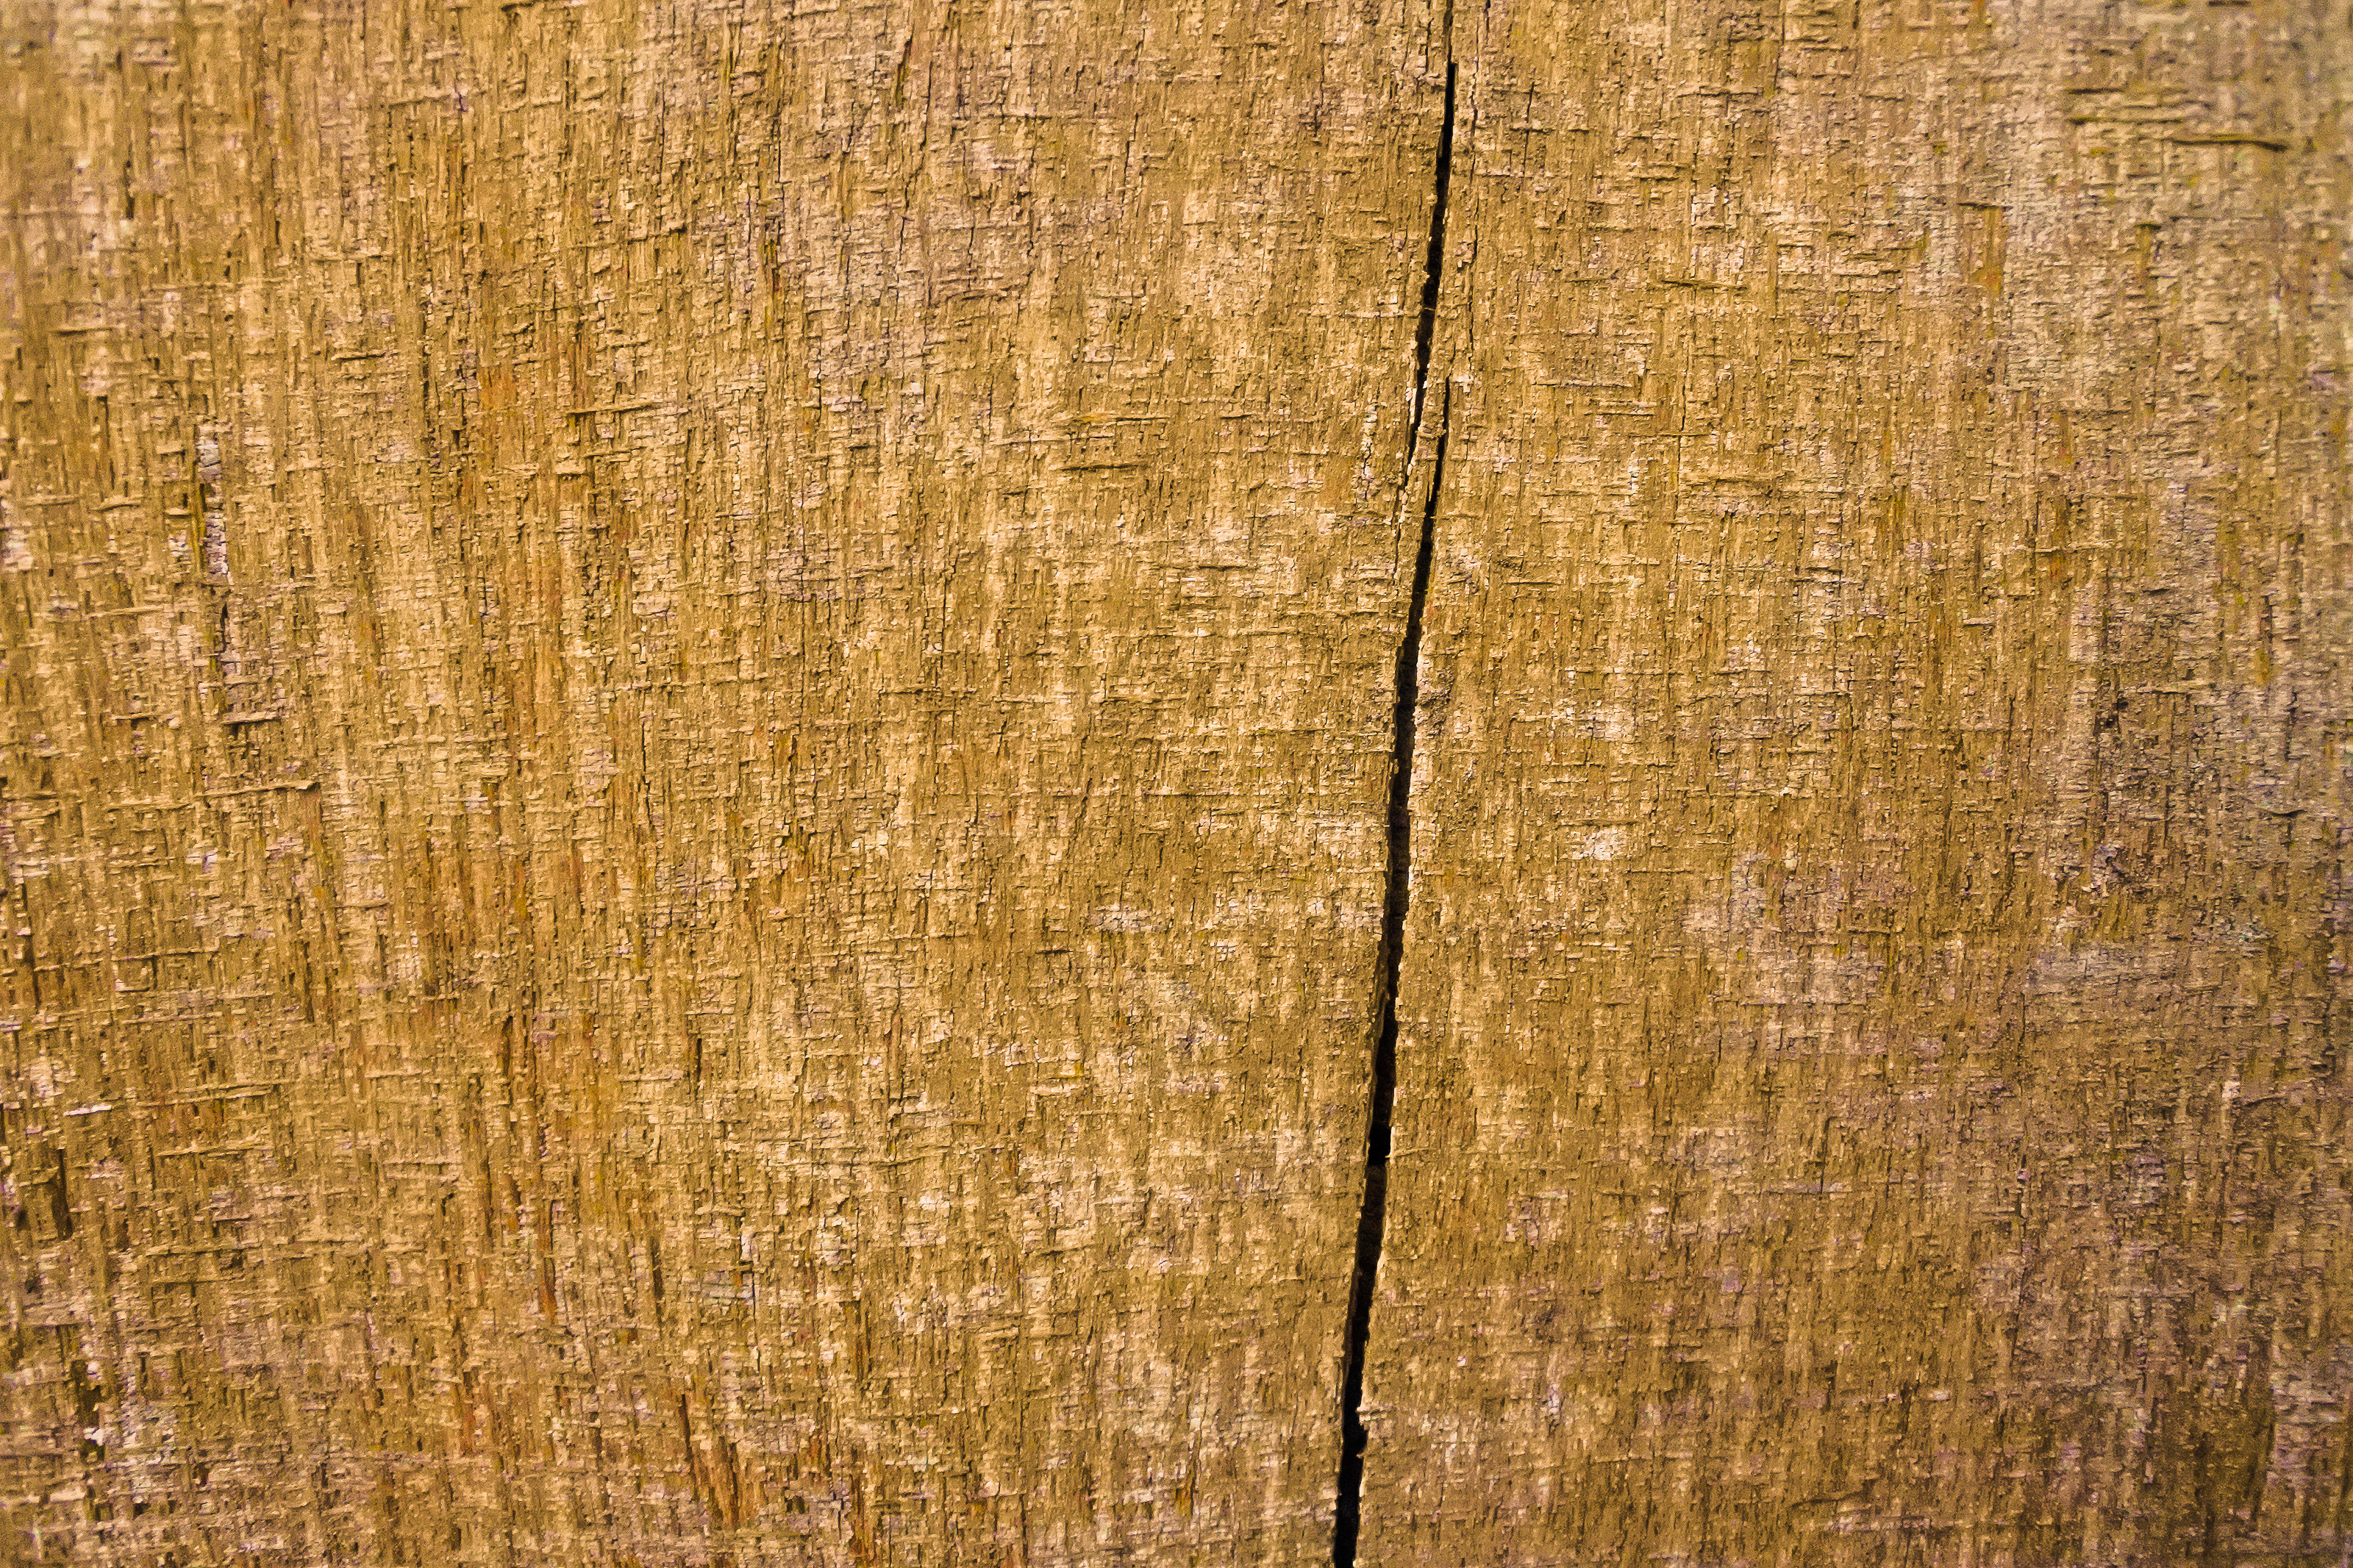 3200x2133 Free Images : aged, barn, board, brown, carpenter, construction, deck, floor, furniture, grain, hardwood, industry, interior, laminate, material, old, panel, parquet, plank, rough, rustic, surface, table, texture, timber, wall, wallpaper, weathered ..